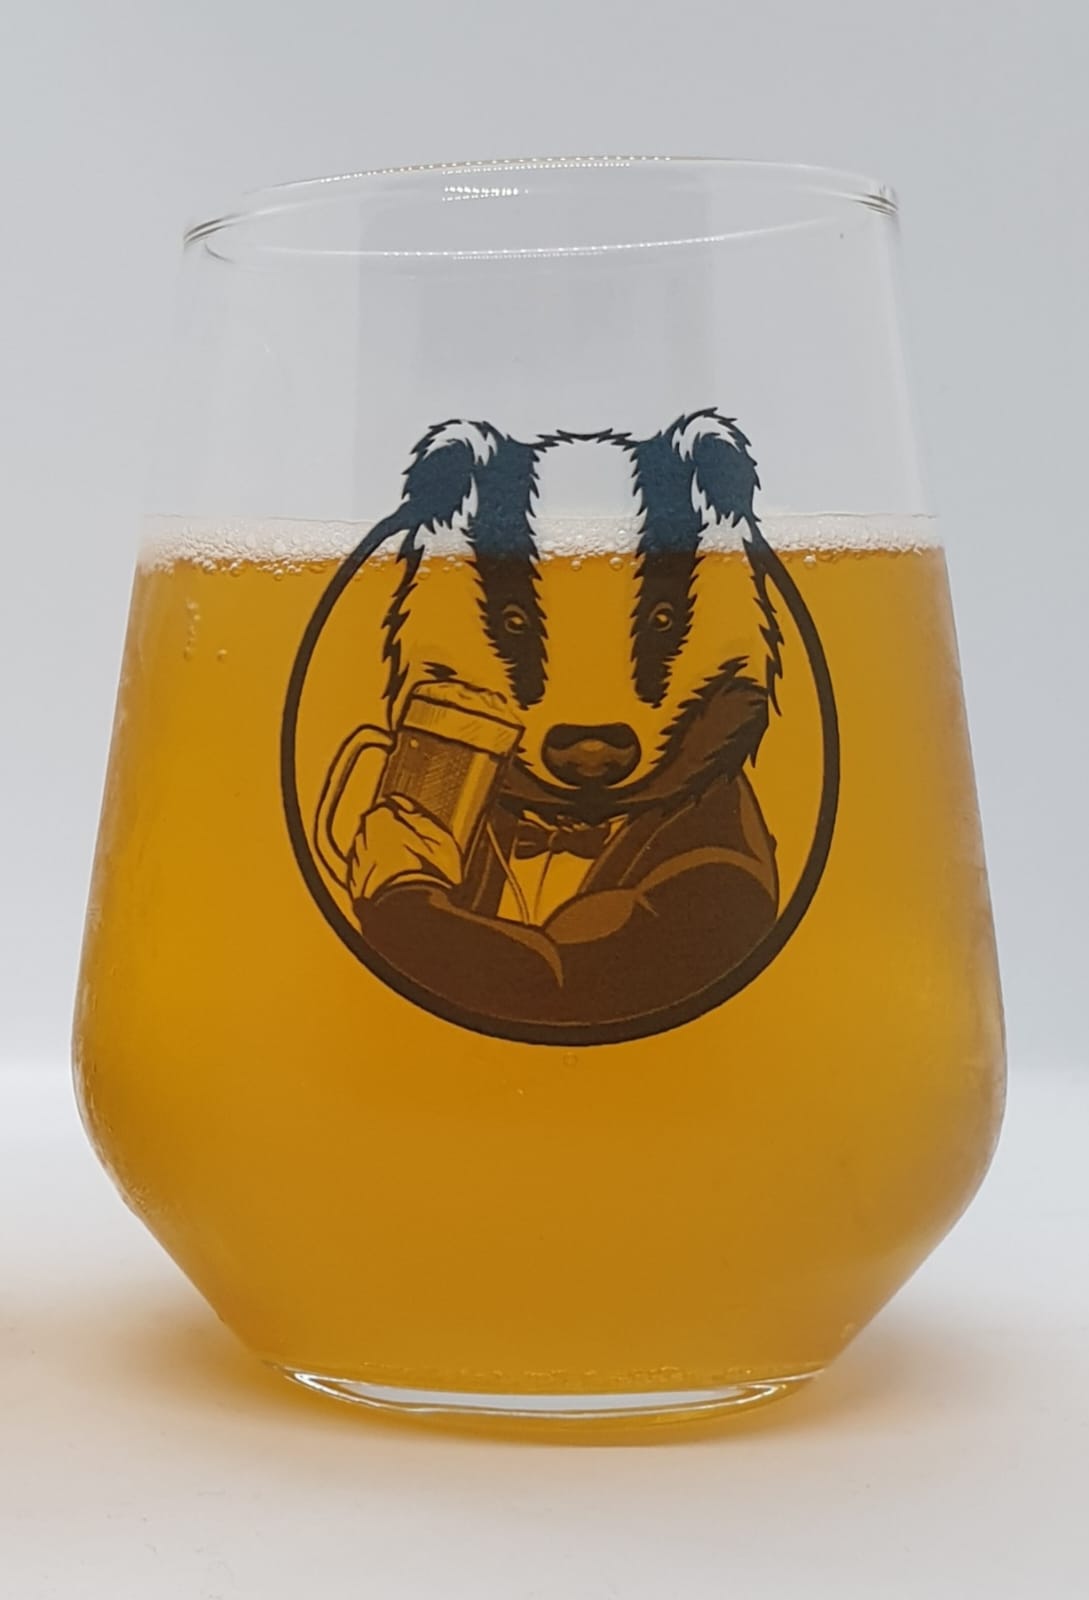 Fox & Badger / His & Hers Beer Tumbler Glass - Perfect Gift Idea for Boyfriend / Girlfriend